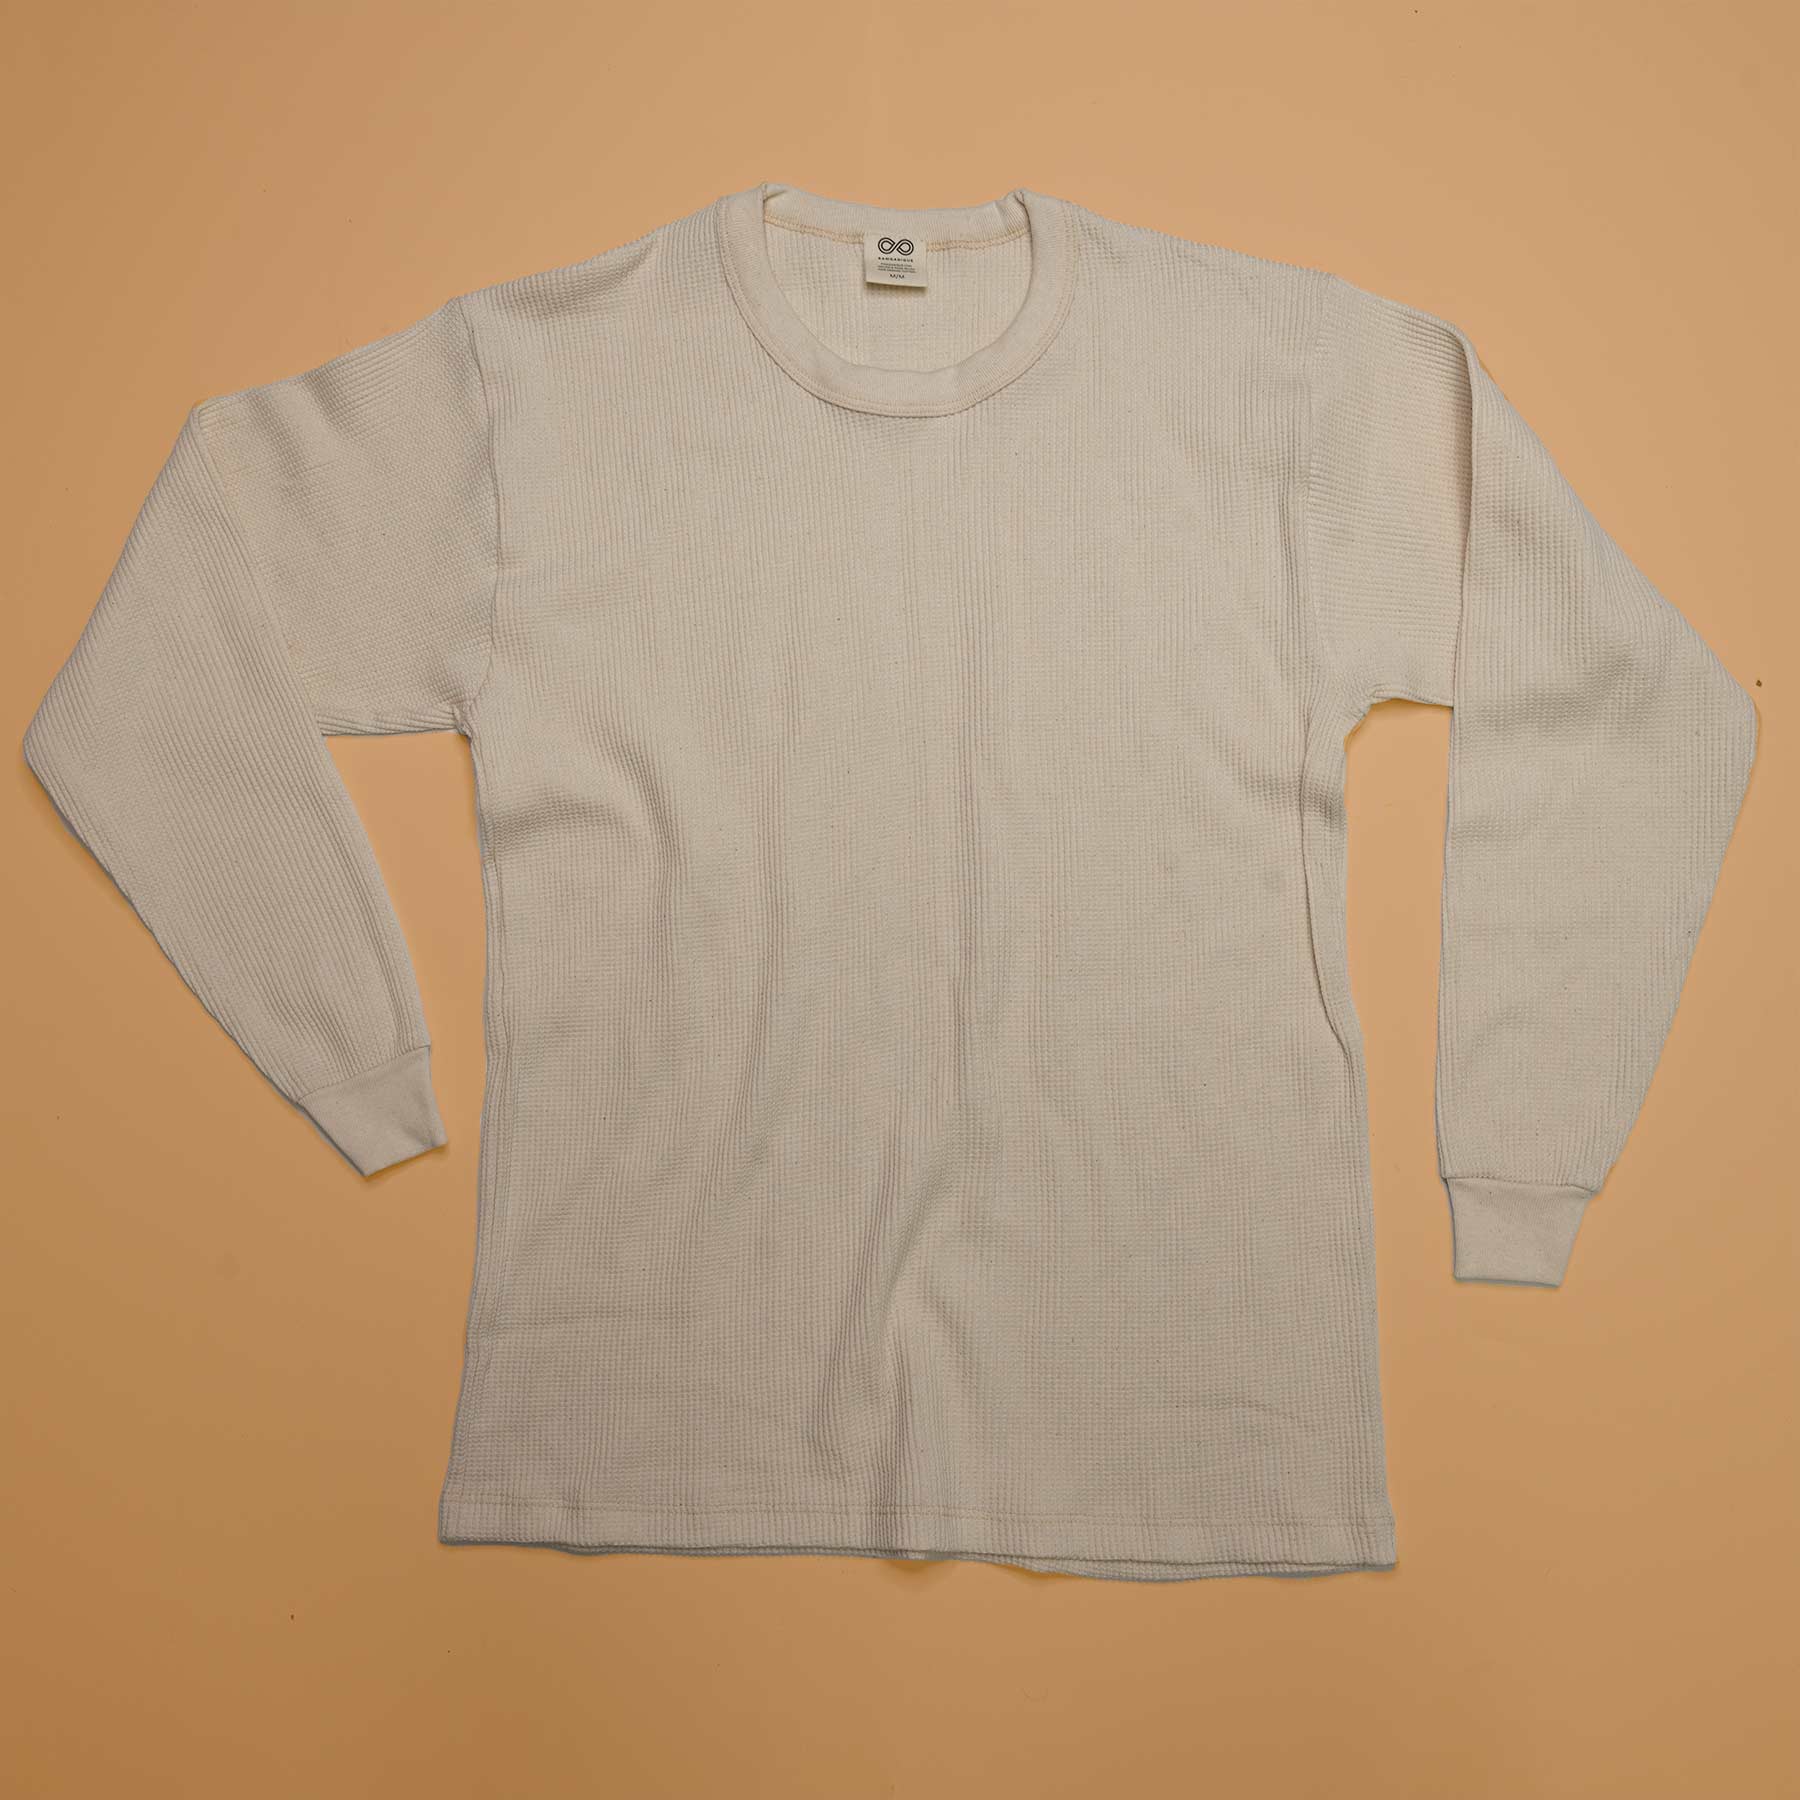 Made in USA 100% Organic Cotton Long-sleeve Crewneck T-shirt by  Rawganique.co since 1997